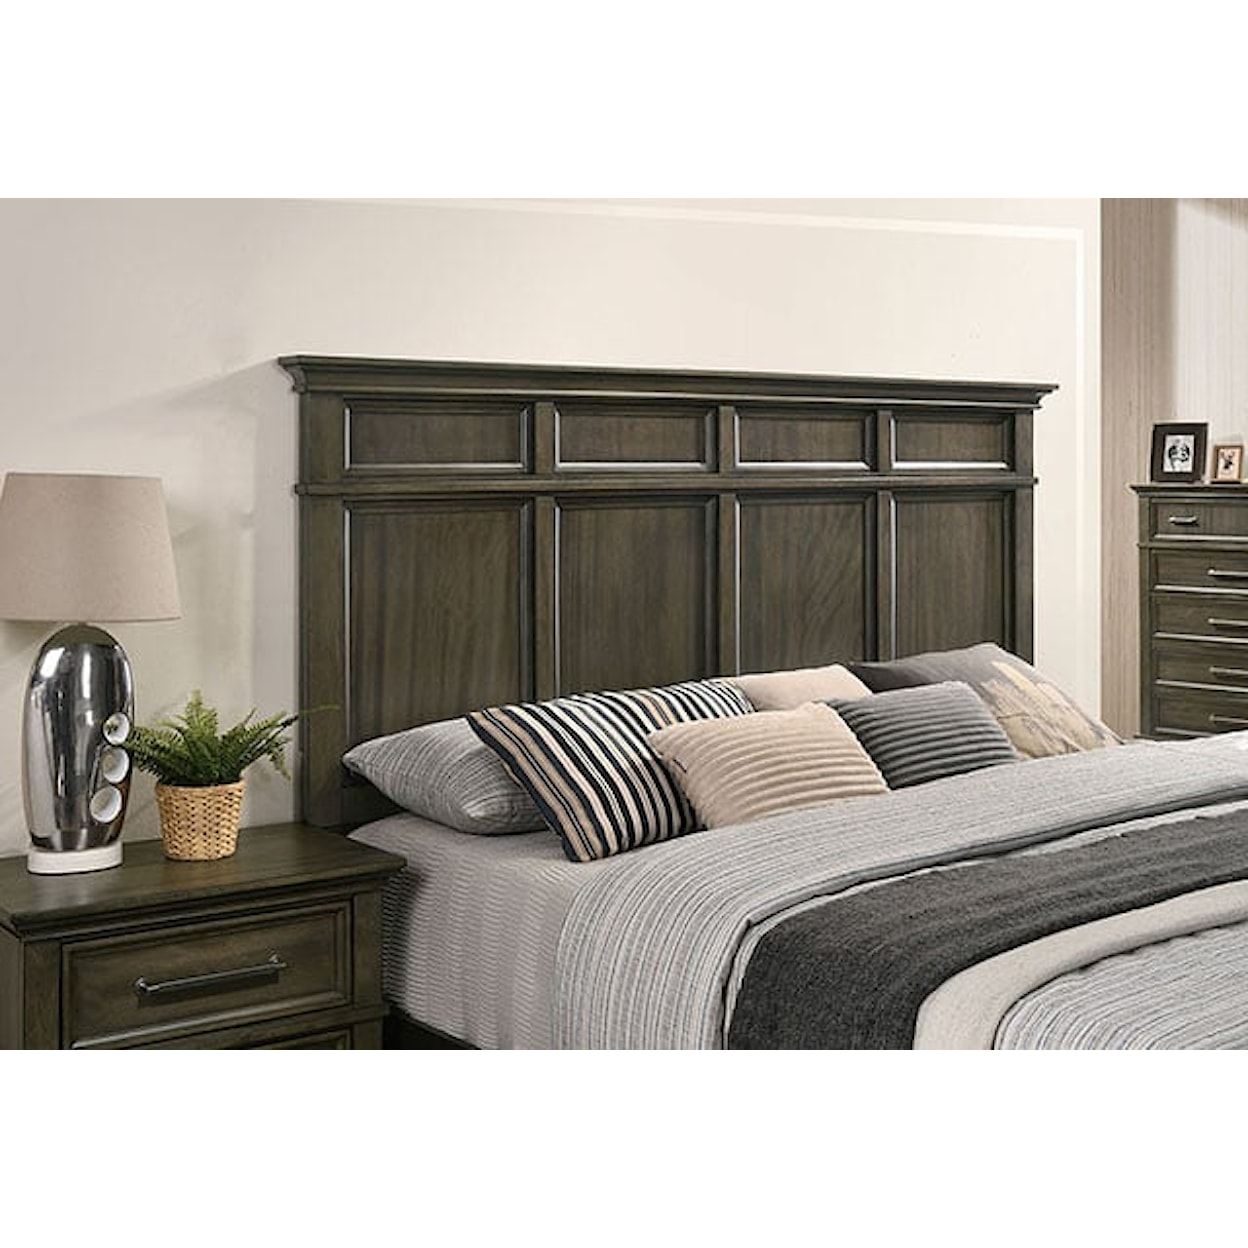 Furniture of America Houston King Panel Bed